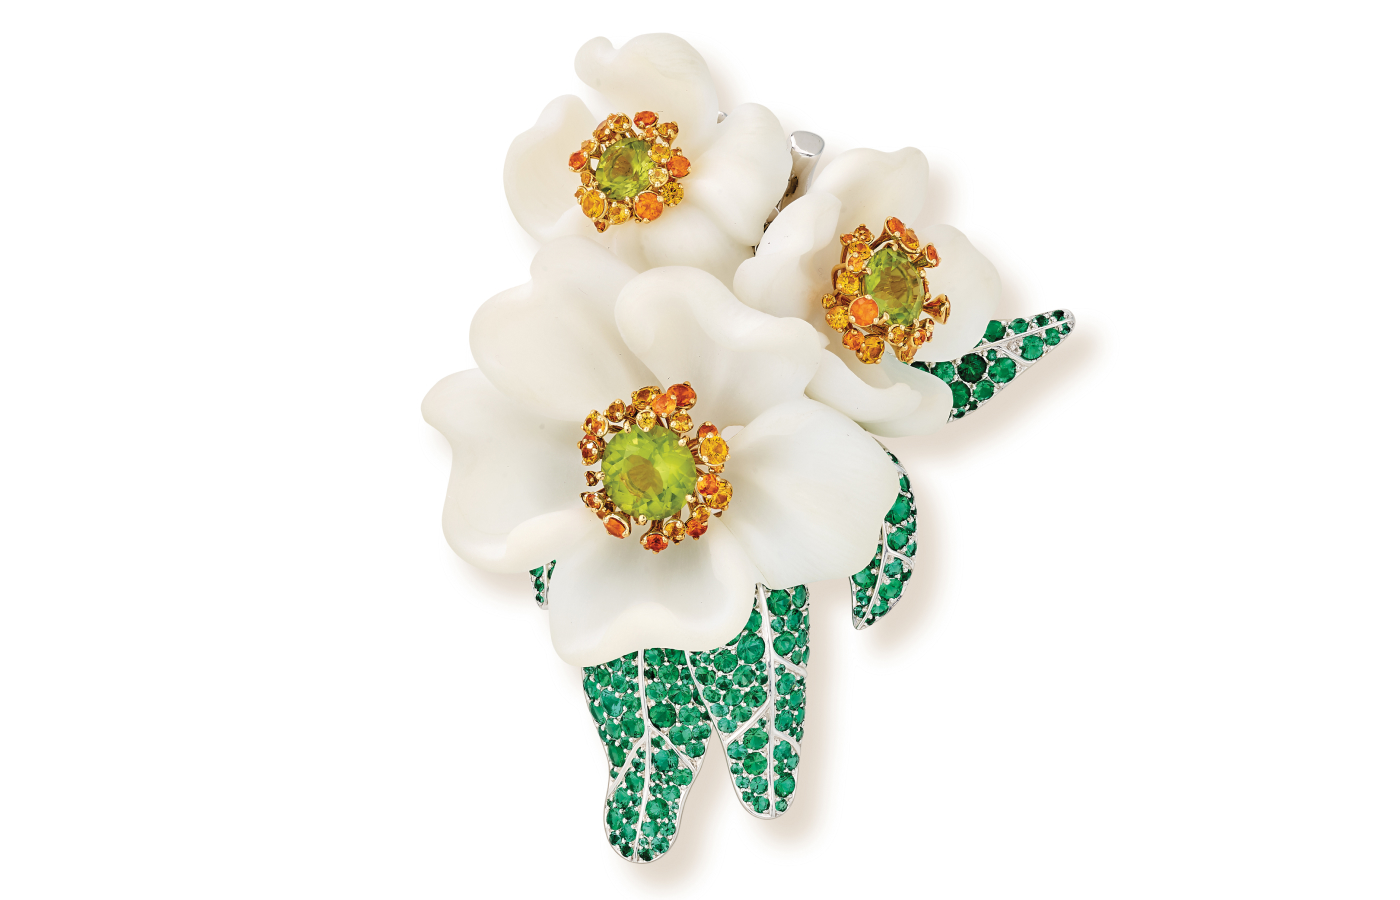 From the California Collection, this floral Carpenteria clip is a celebration of lush landscapes found across the West Coast of North America. Depicting the flower of the bush anemone or the Carpenteria californica, the Carpenteria clip (2016) features platinum, yellow gold, garnets, yellow sapphires, and peridots and uses white opal for the sculpted, delicate petals. Photo: Van Cleef & Arpels